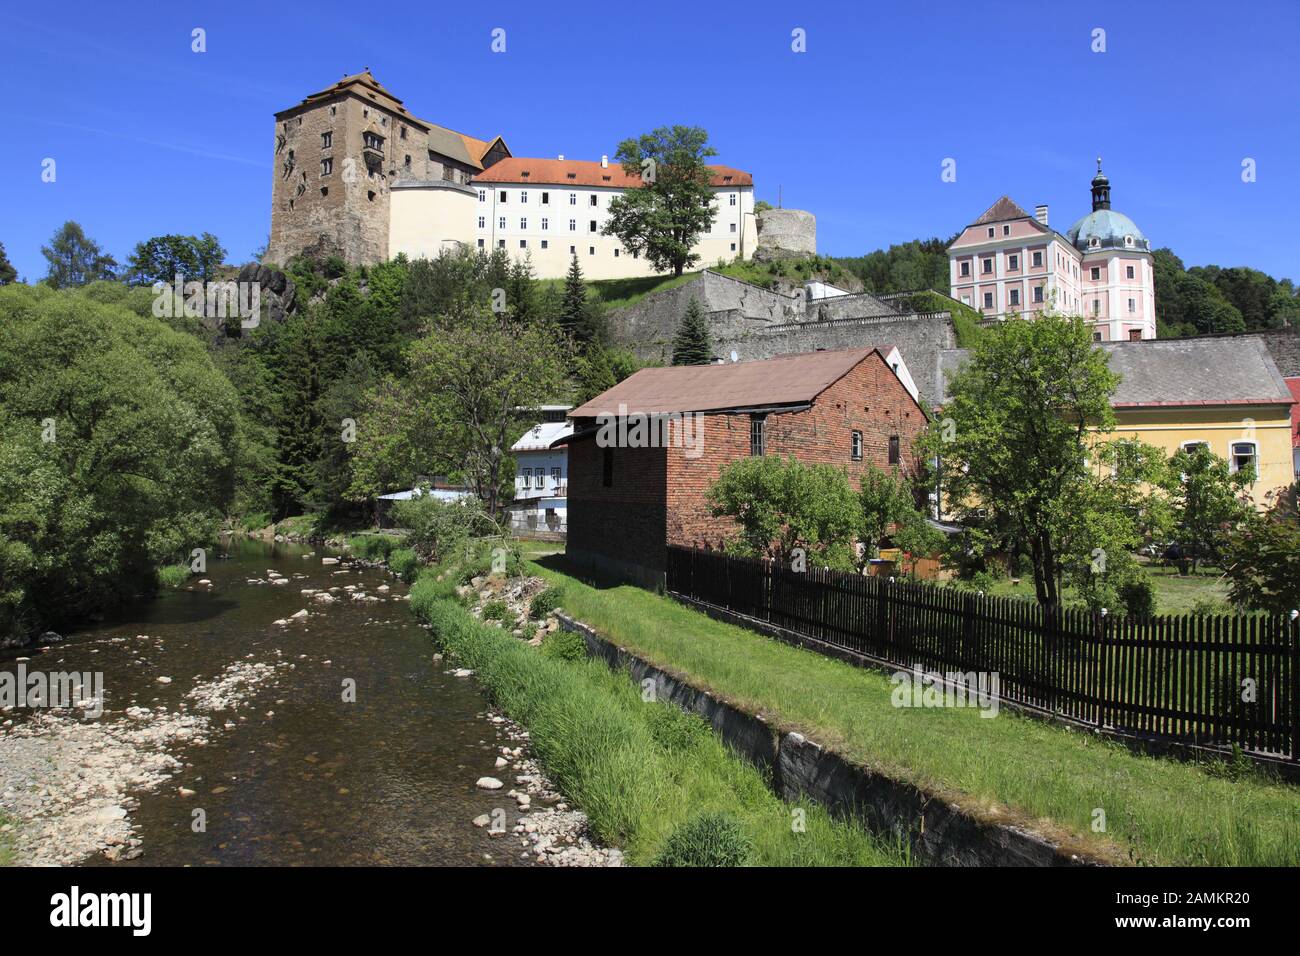 Becov nad Teplou Castle and Chateau, , German Petschau, in the town of the same name, Tepla River, Czech Republic, Europe [automated translation] Stock Photo